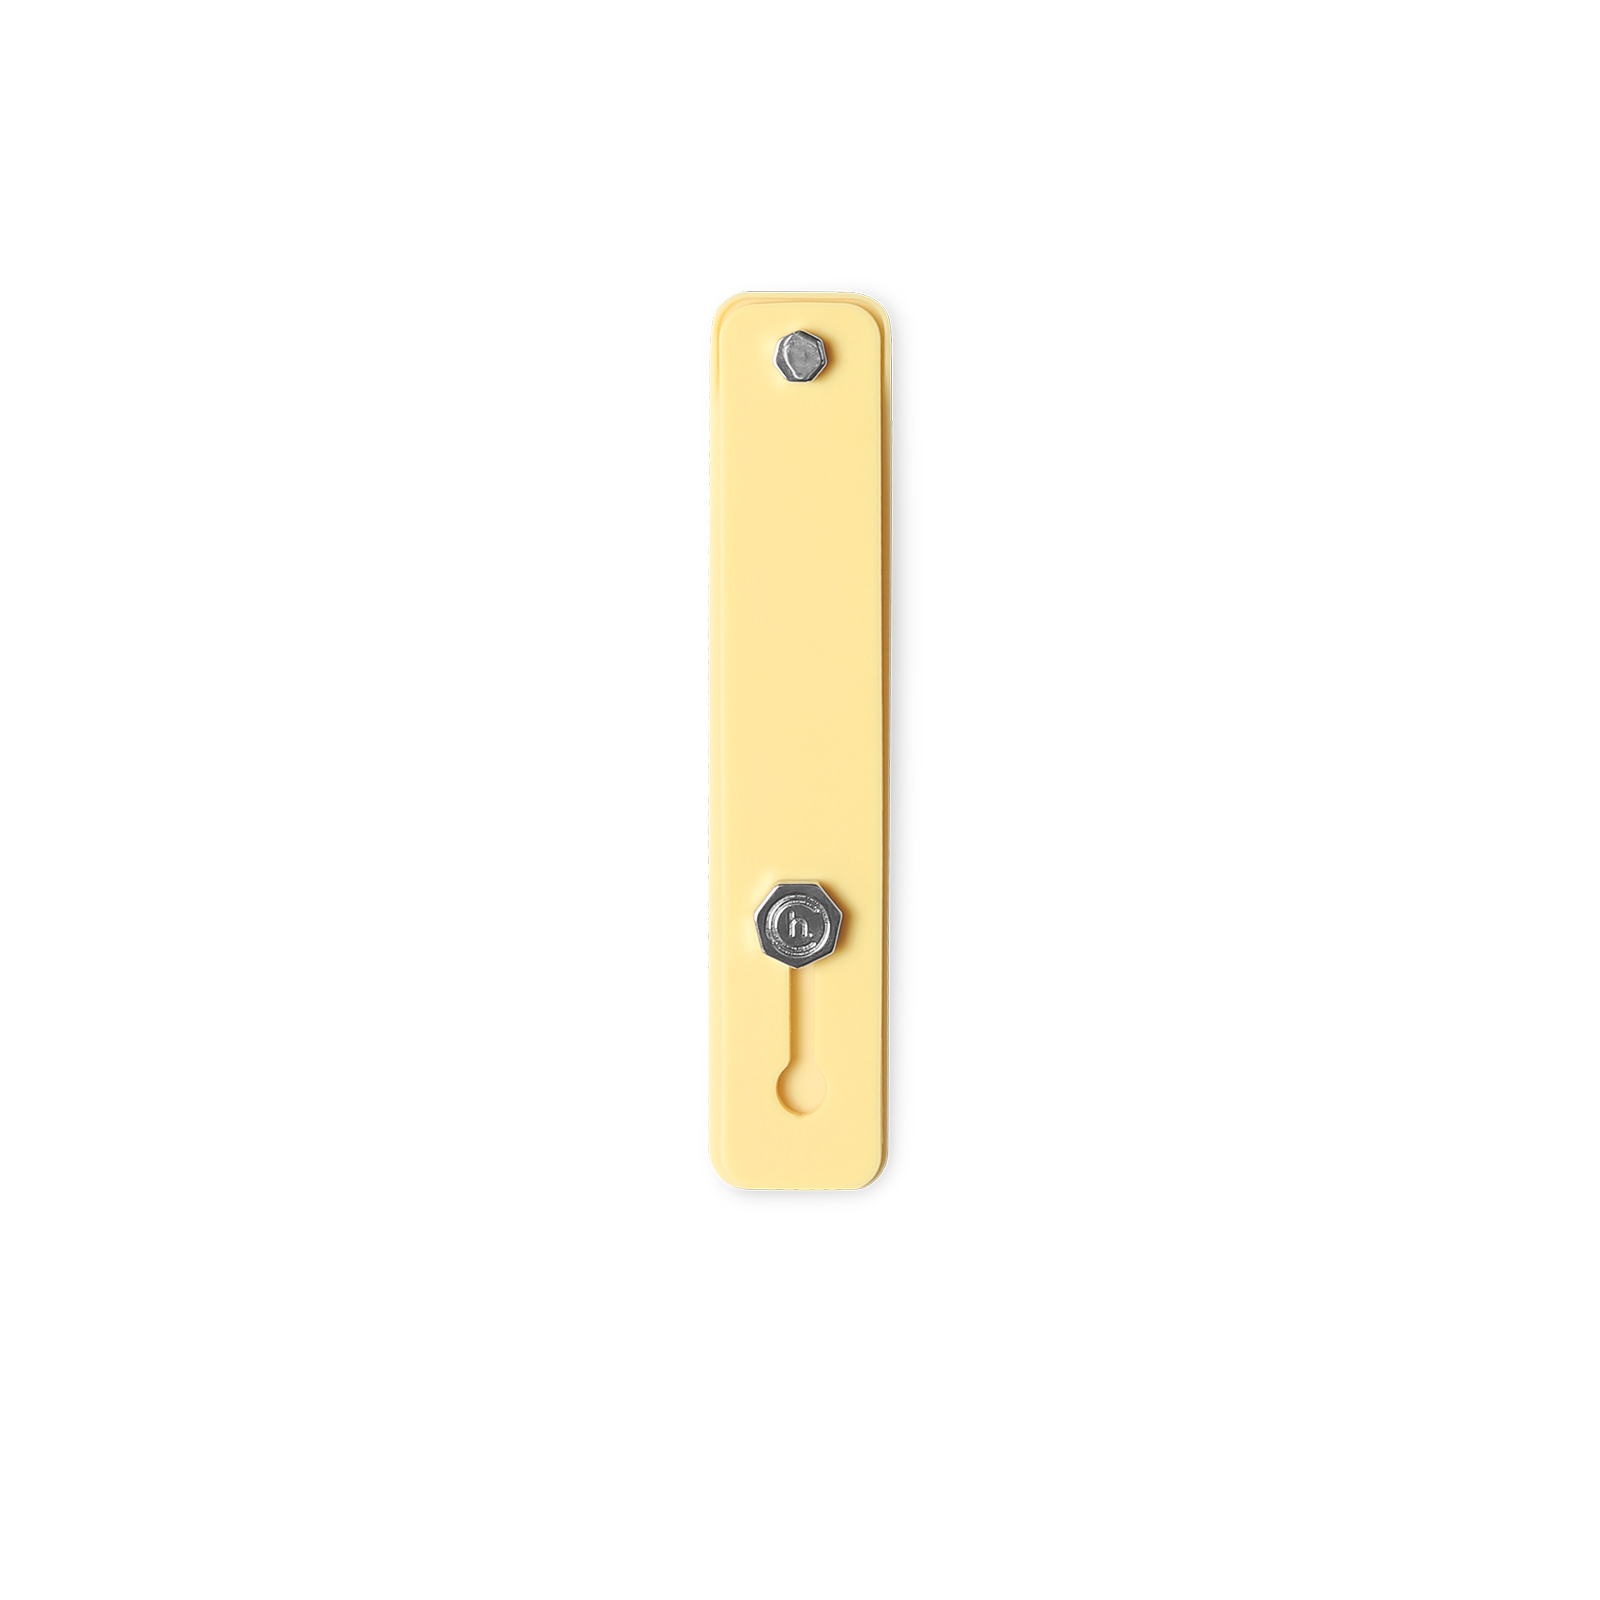 Finger strap, attachable phone grip, yellow